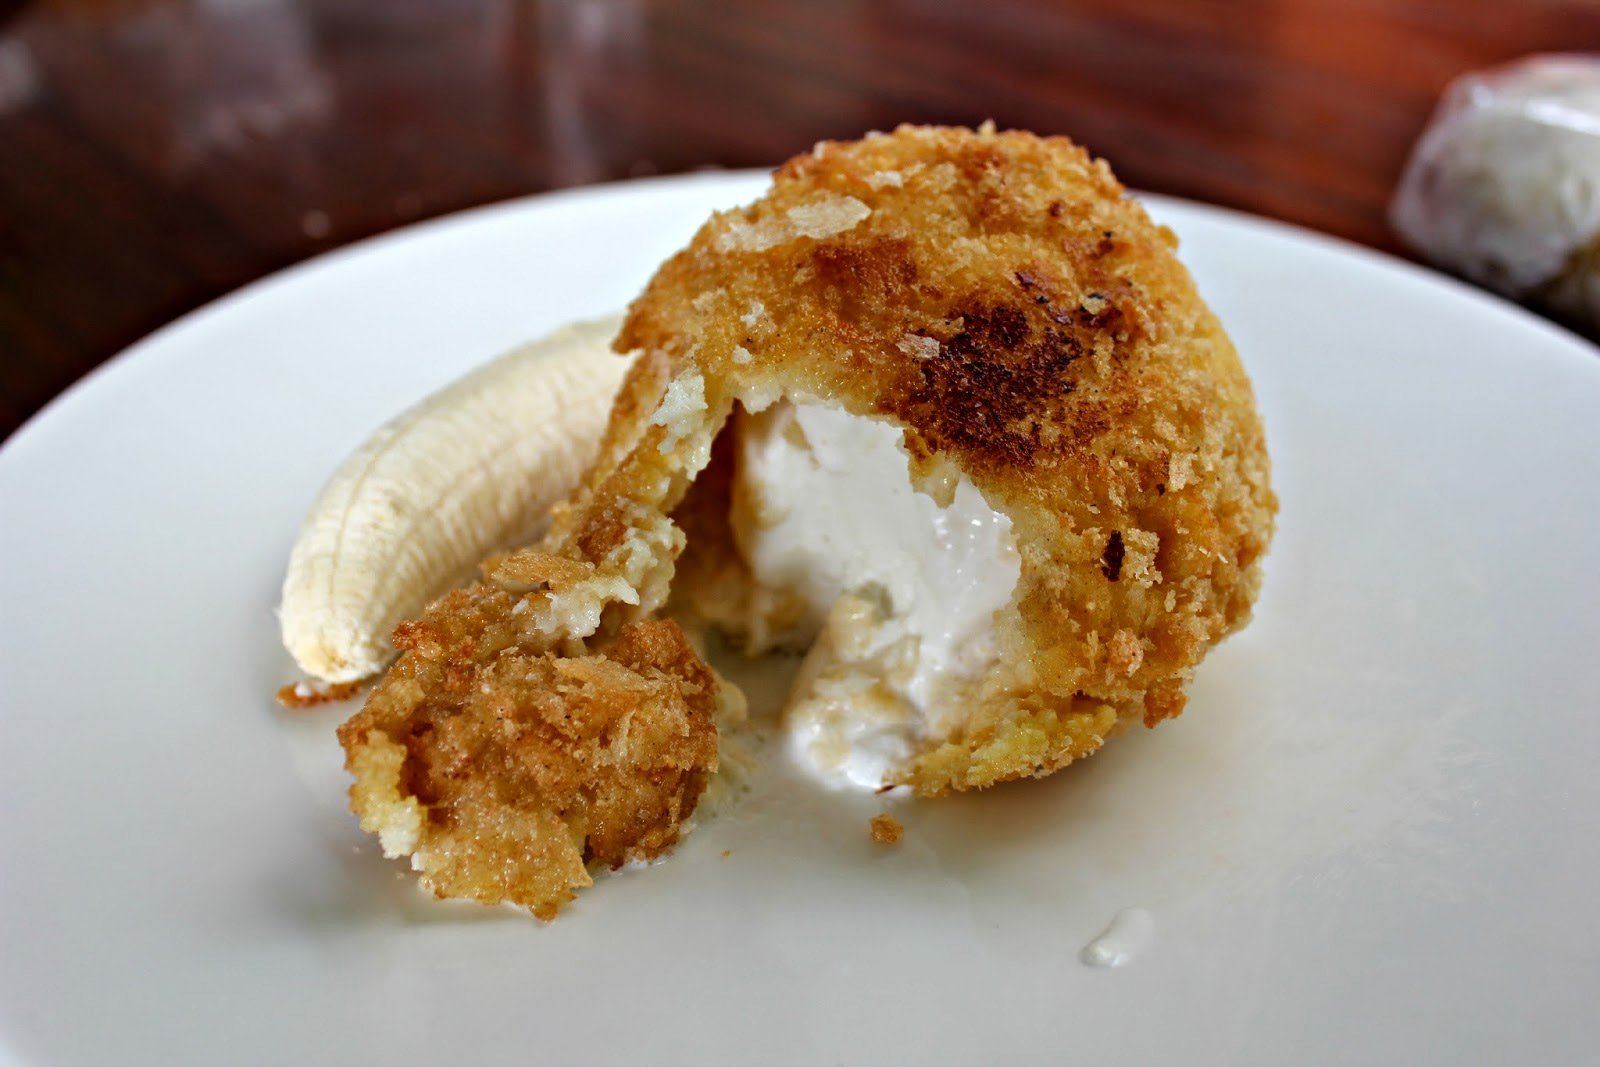 How to try fried ice cream in Phuket